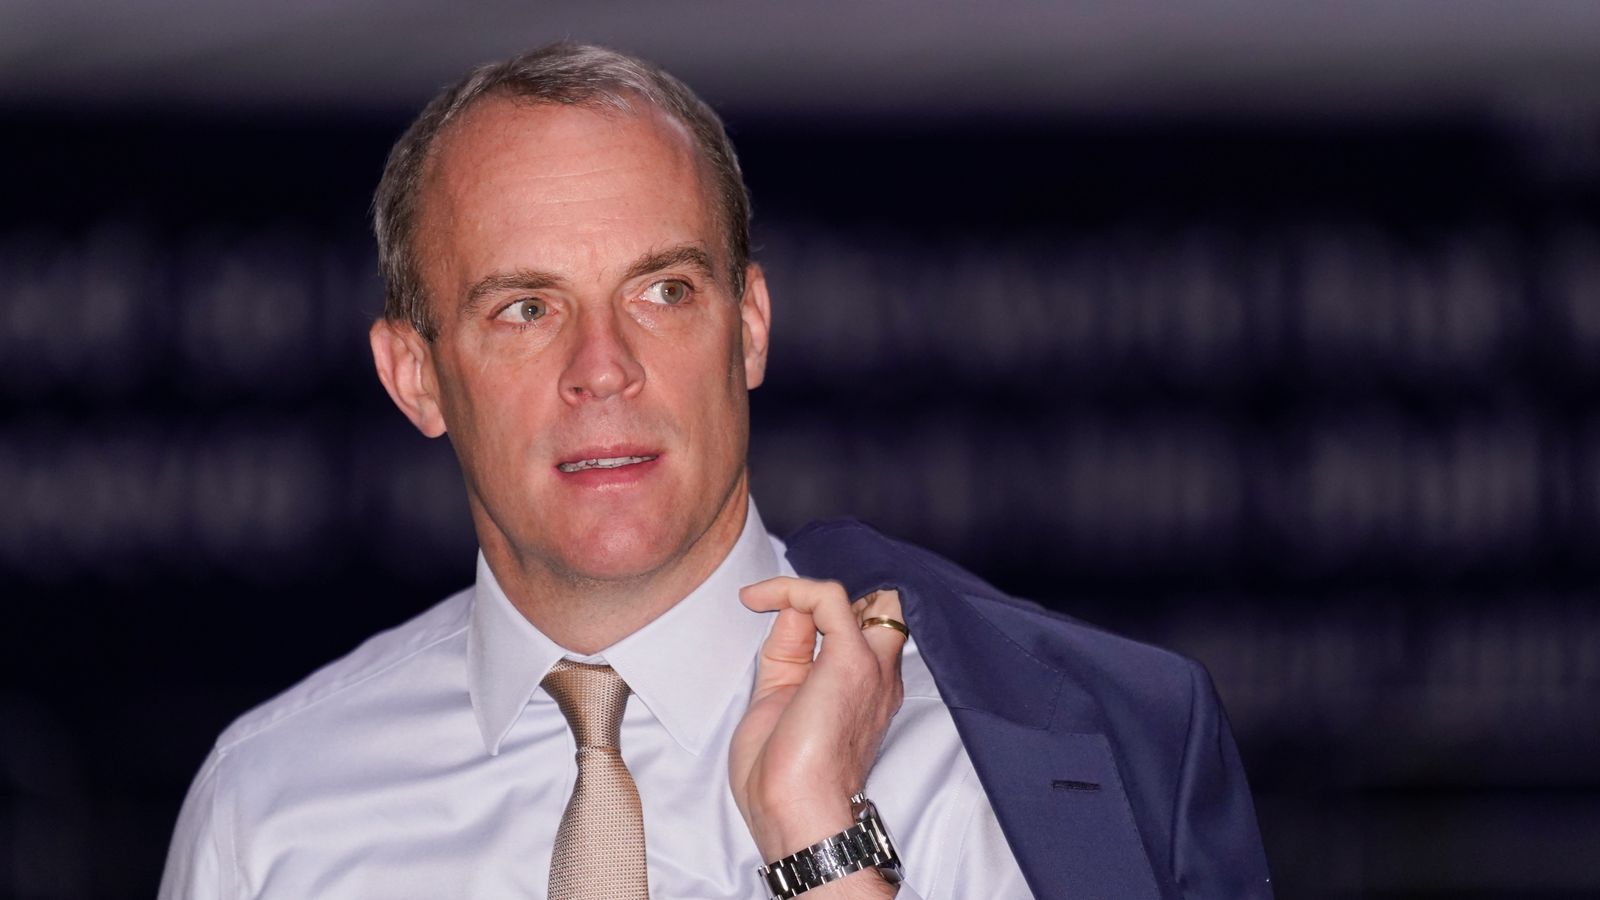 Dominic Raab to stand down as MP at next general election